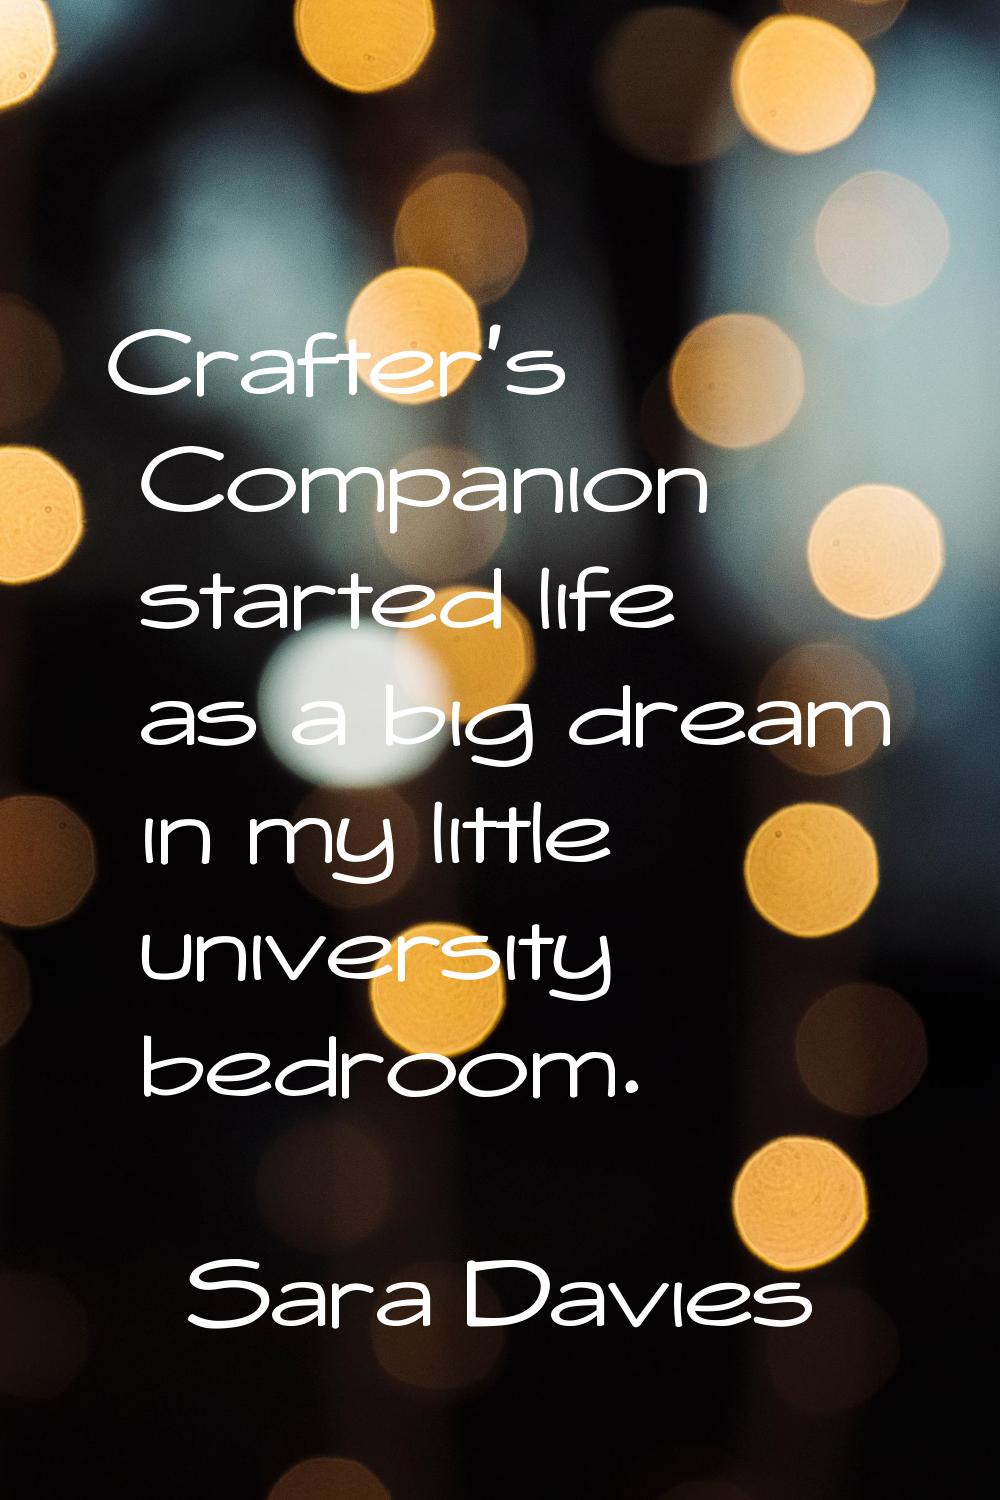 Crafter's Companion started life as a big dream in my little university bedroom.